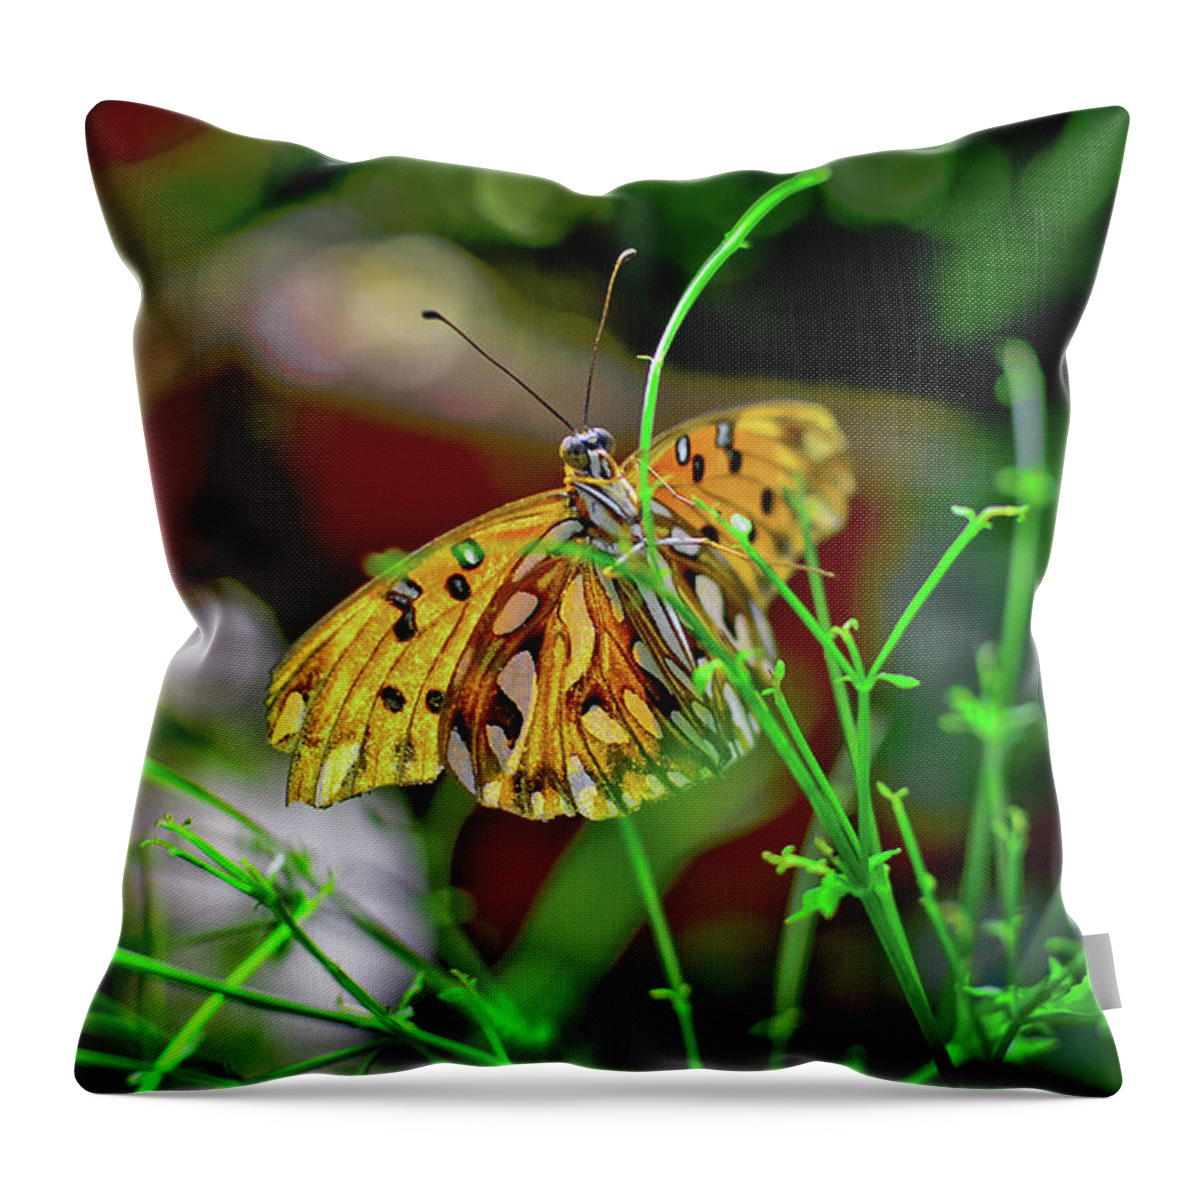 Abstract Throw Pillow featuring the photograph Nature - Butterfly and Plants by Carlos Alkmin